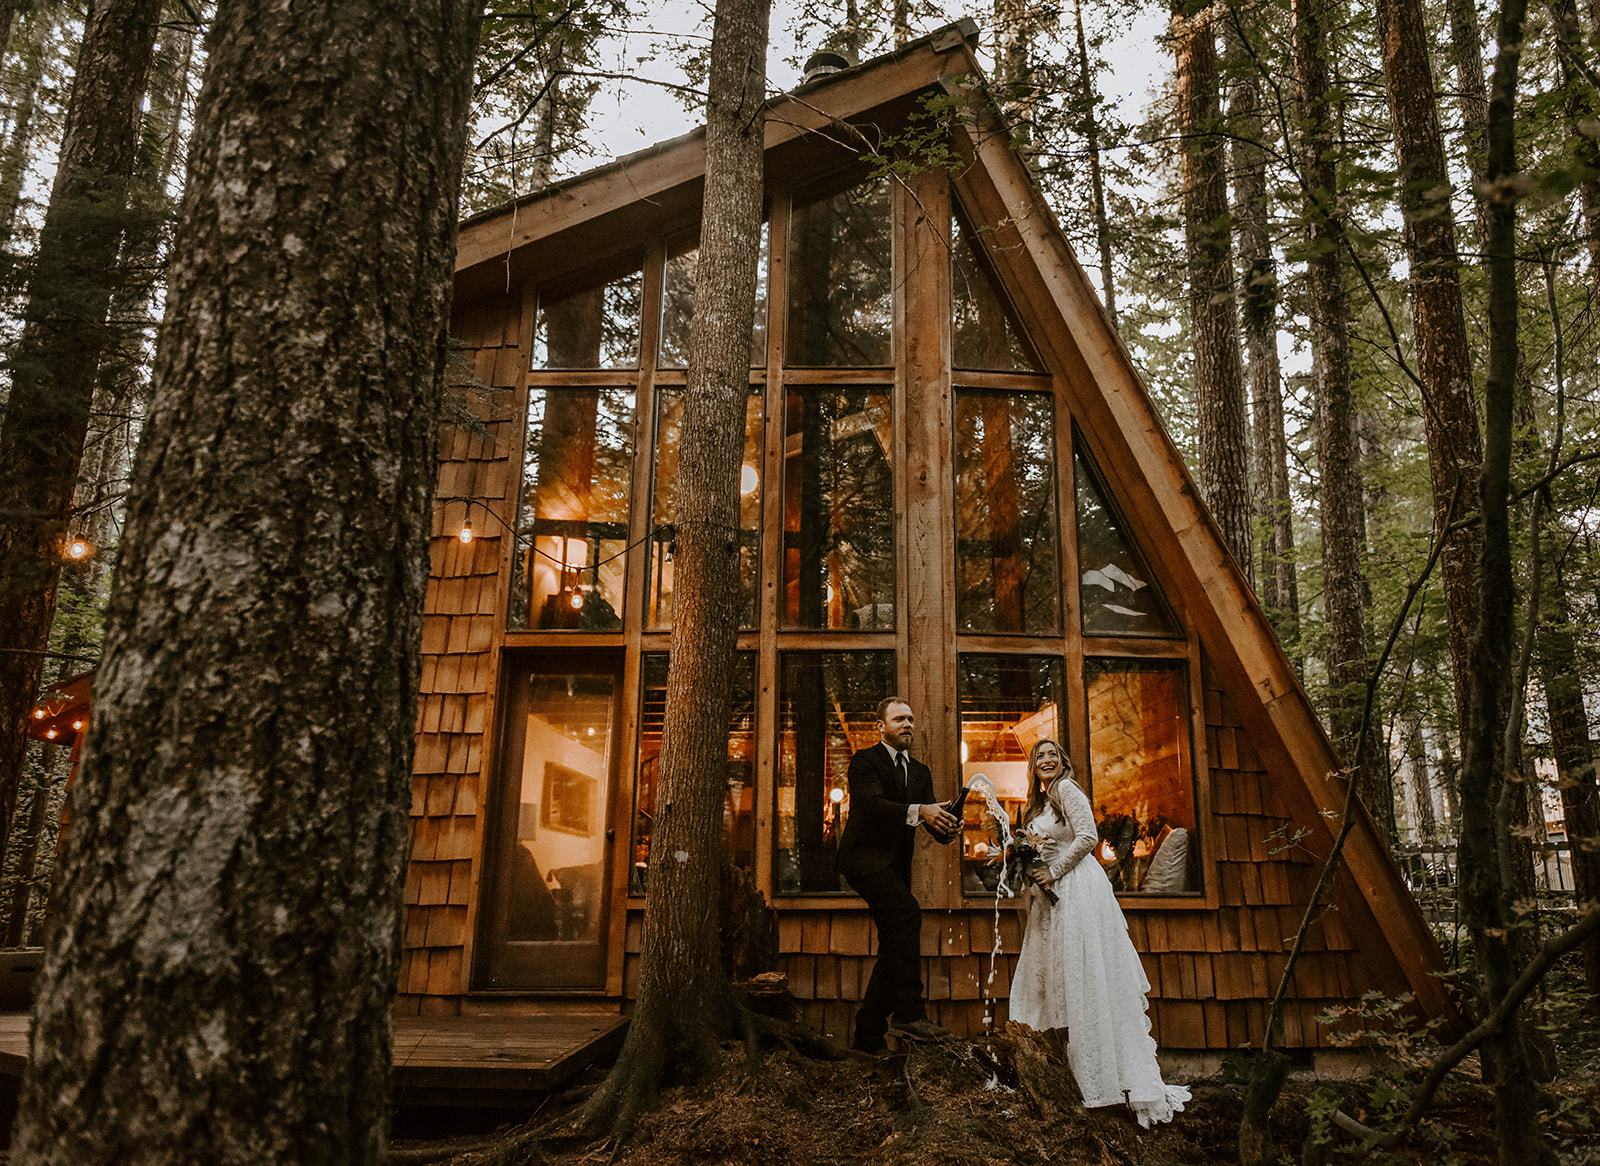 A couple who eloped popping a bottle of champagne in front of an A-Frame cabin after saying their vows